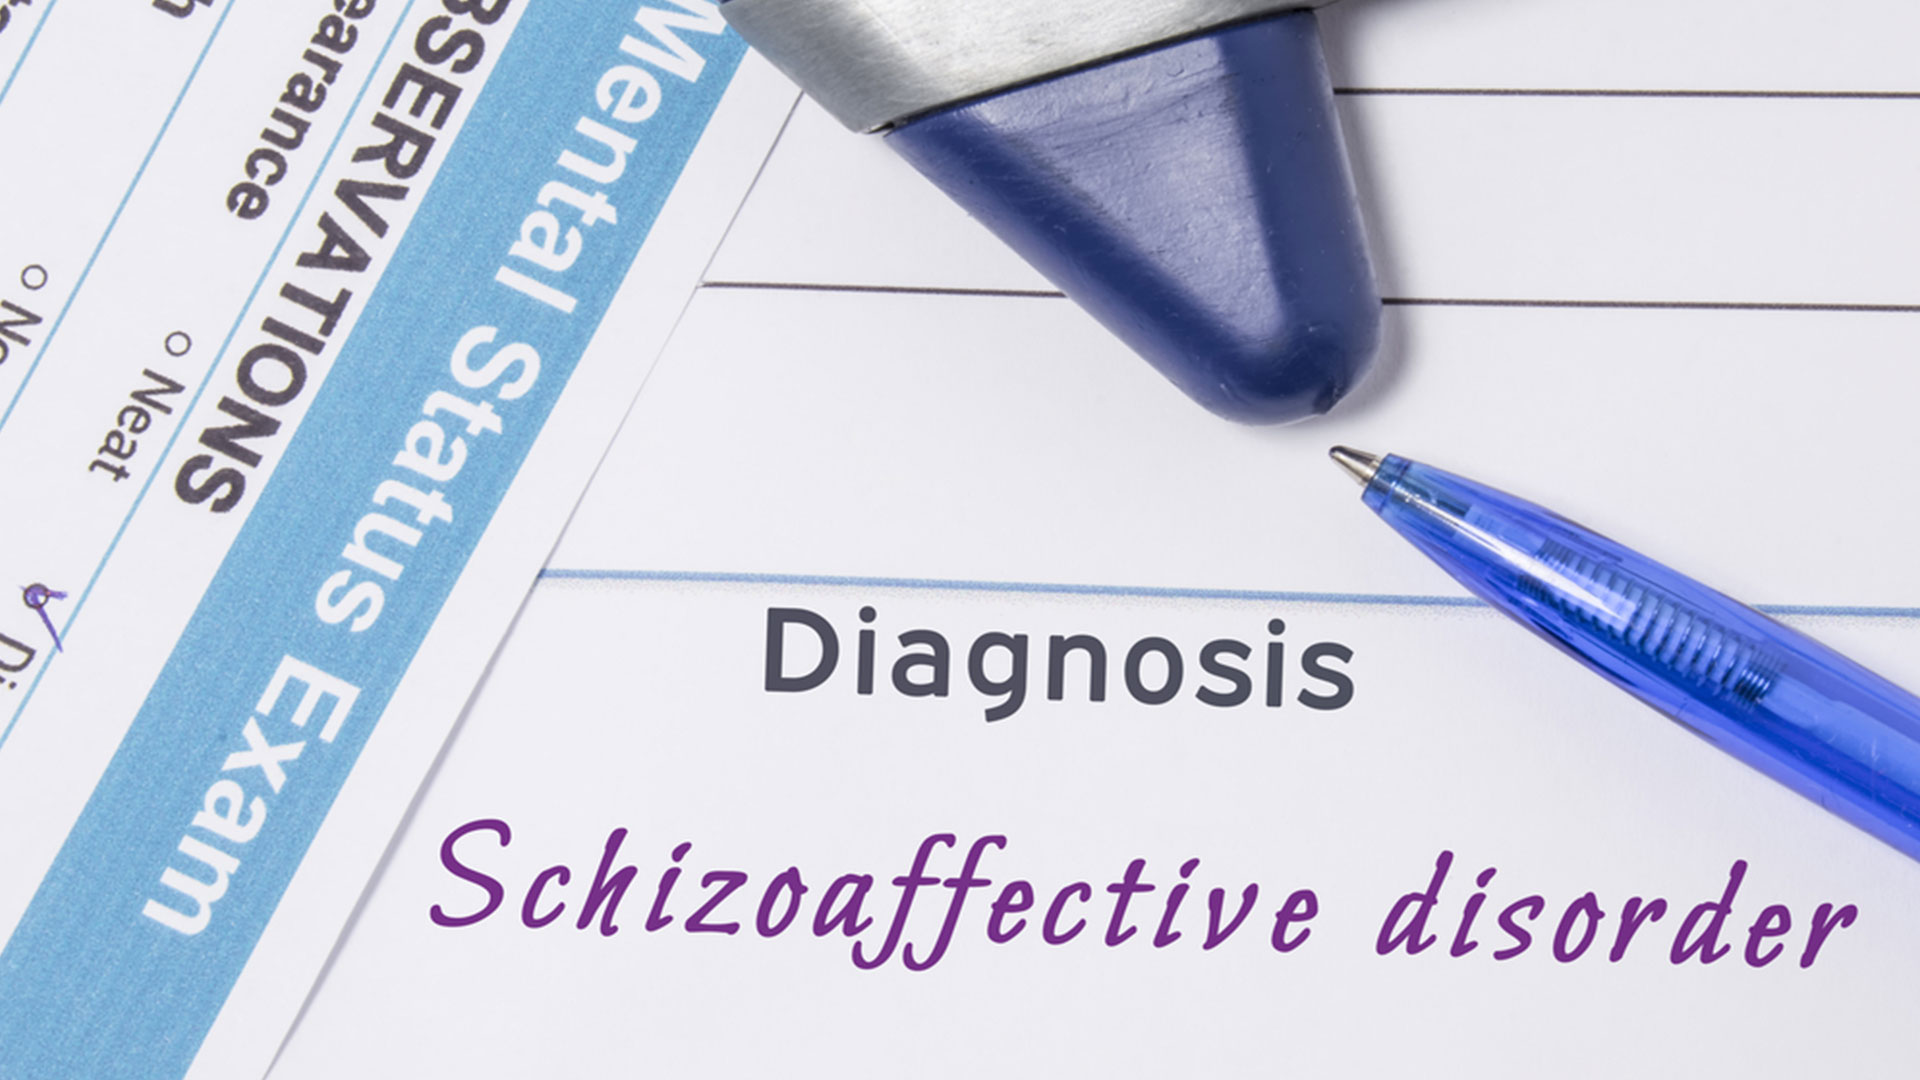 VA Disability Ratings for Schizoaffective Disorder...